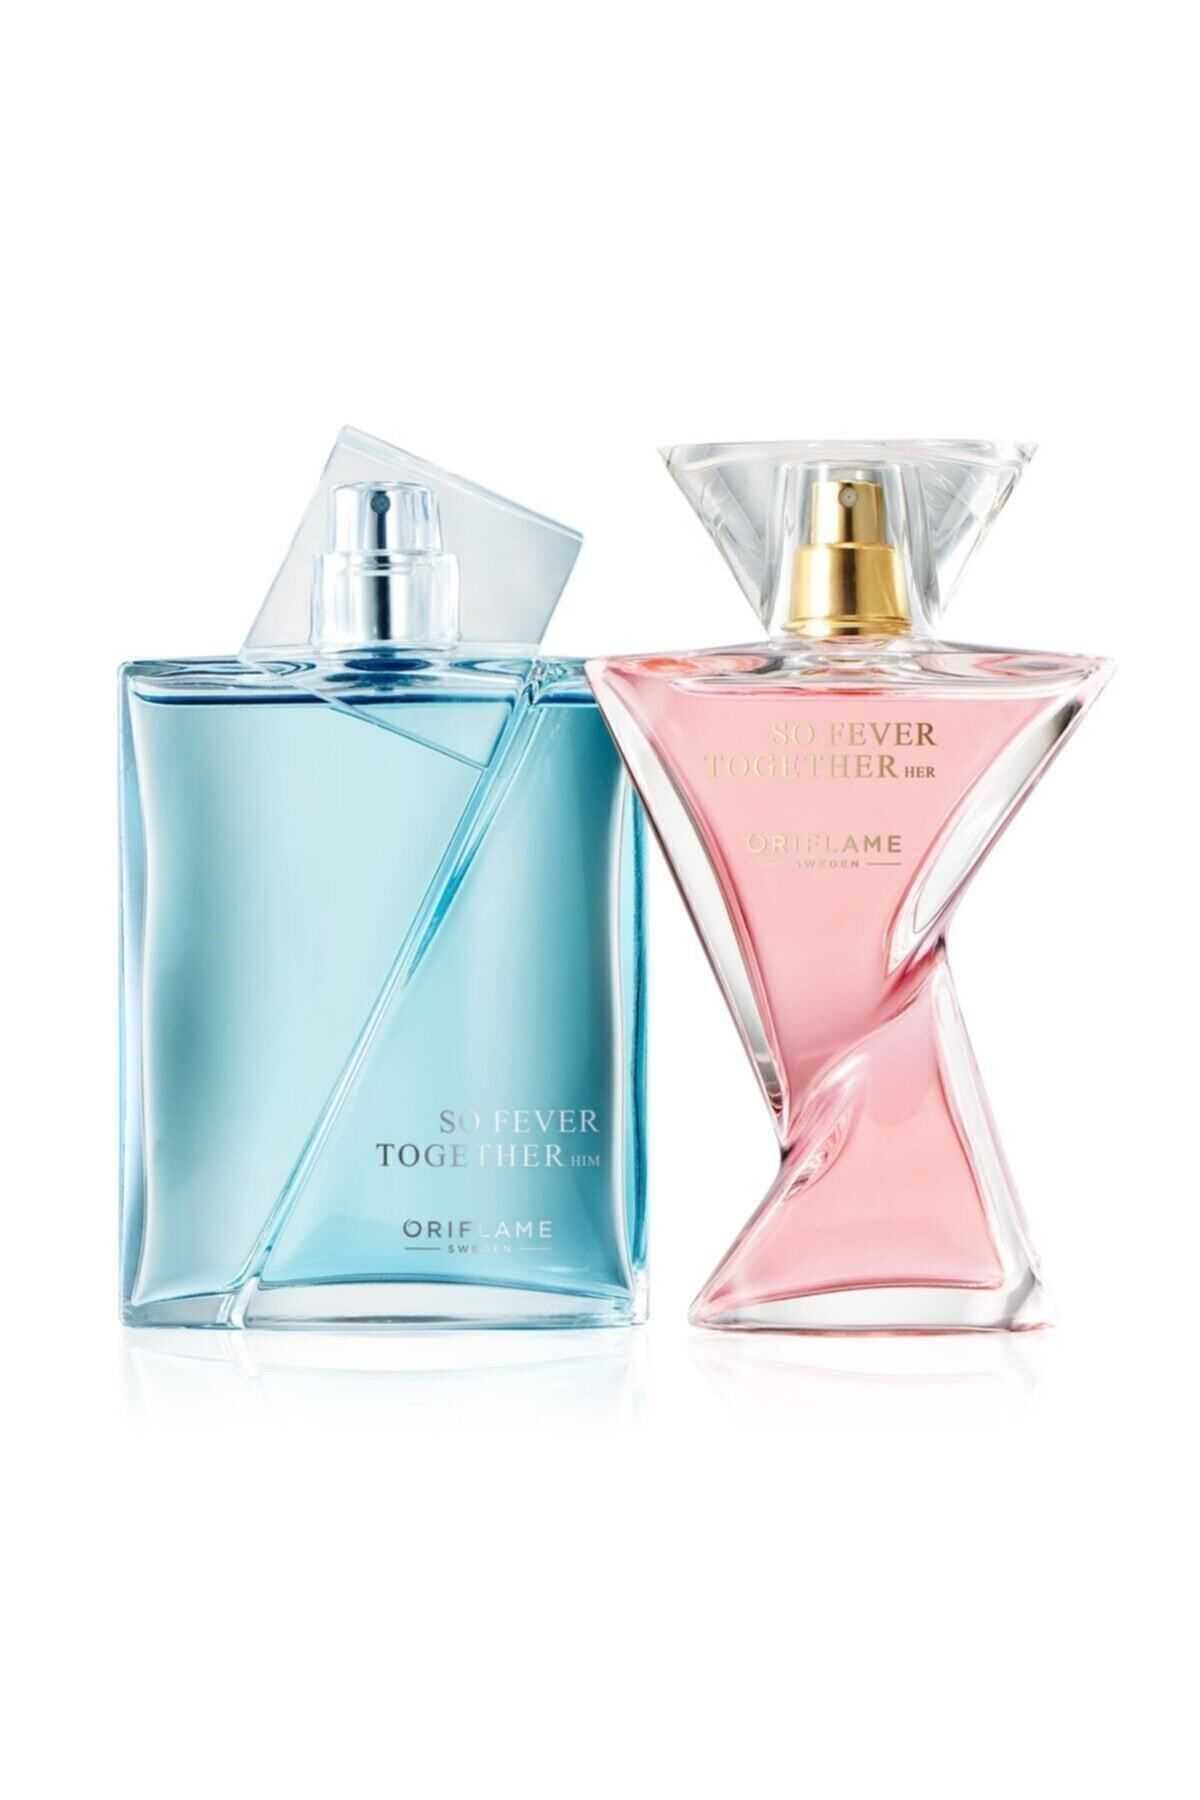 Oriflame So Fever Together Her Edp 50 ml + So Fever Together Him Edt 75 ml